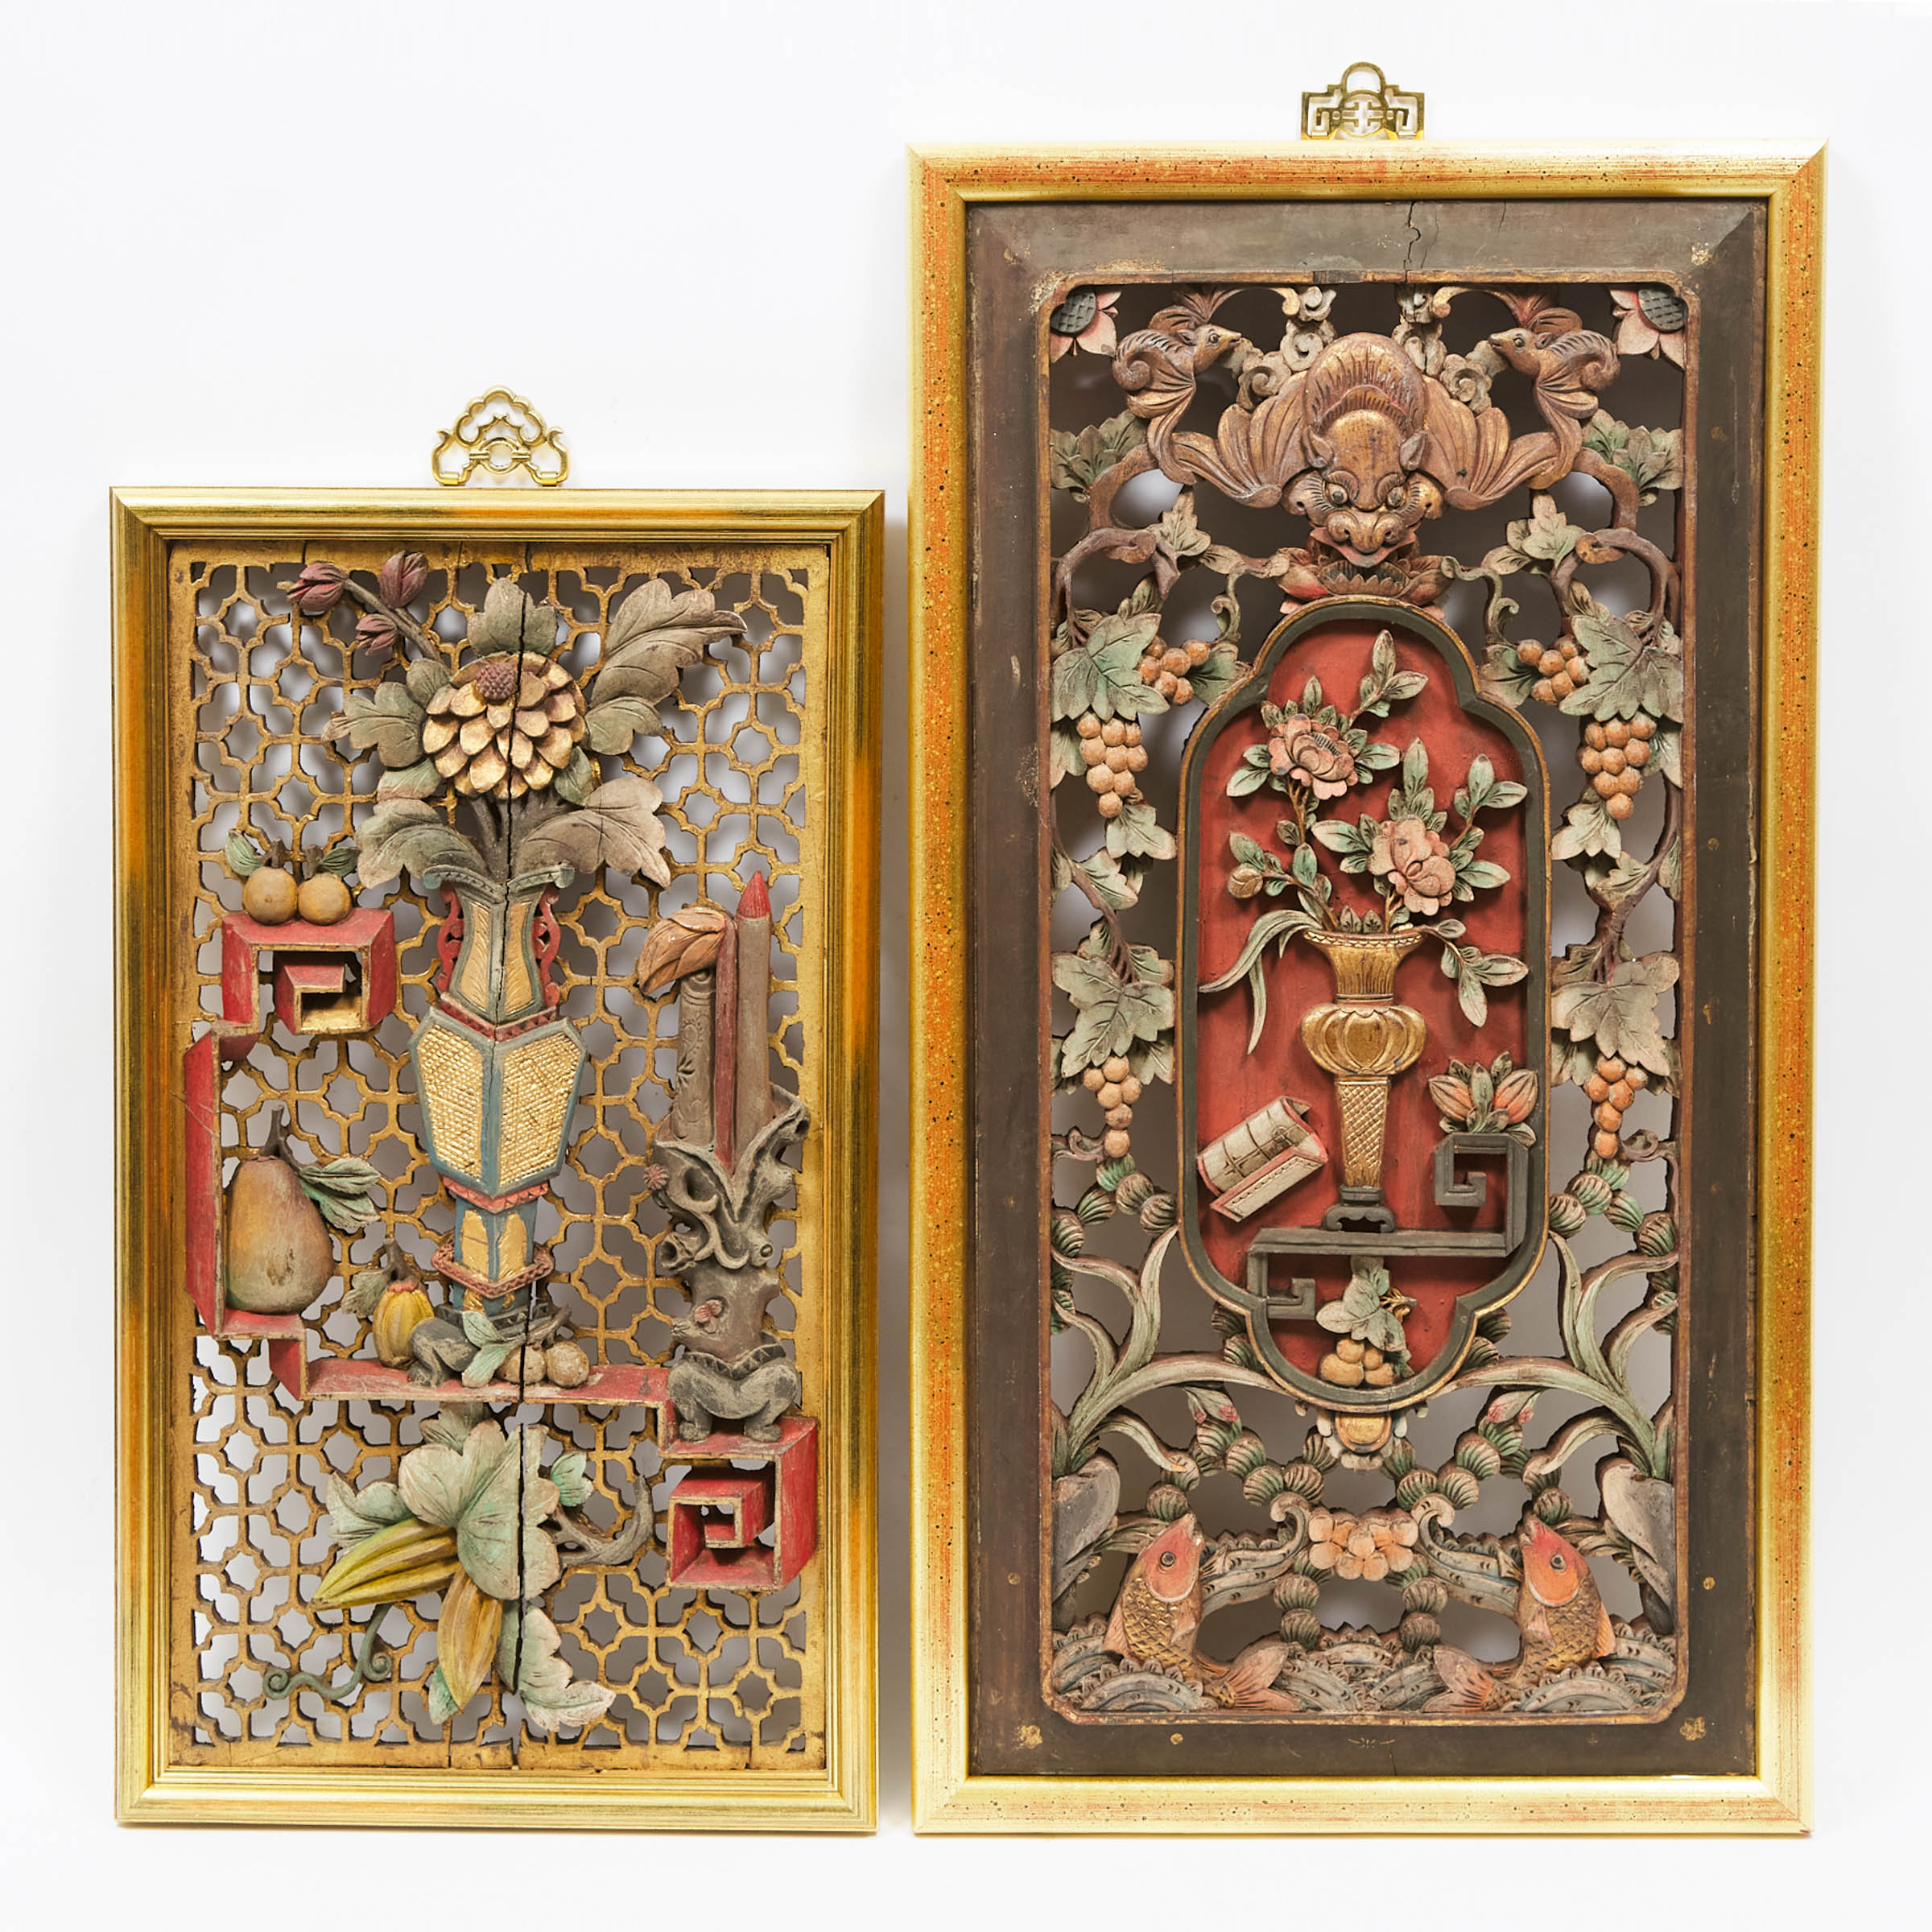 Two Gilt Polychrome Openwork 'Floral' Wood Panels, Qing Dynasty, 19th Century